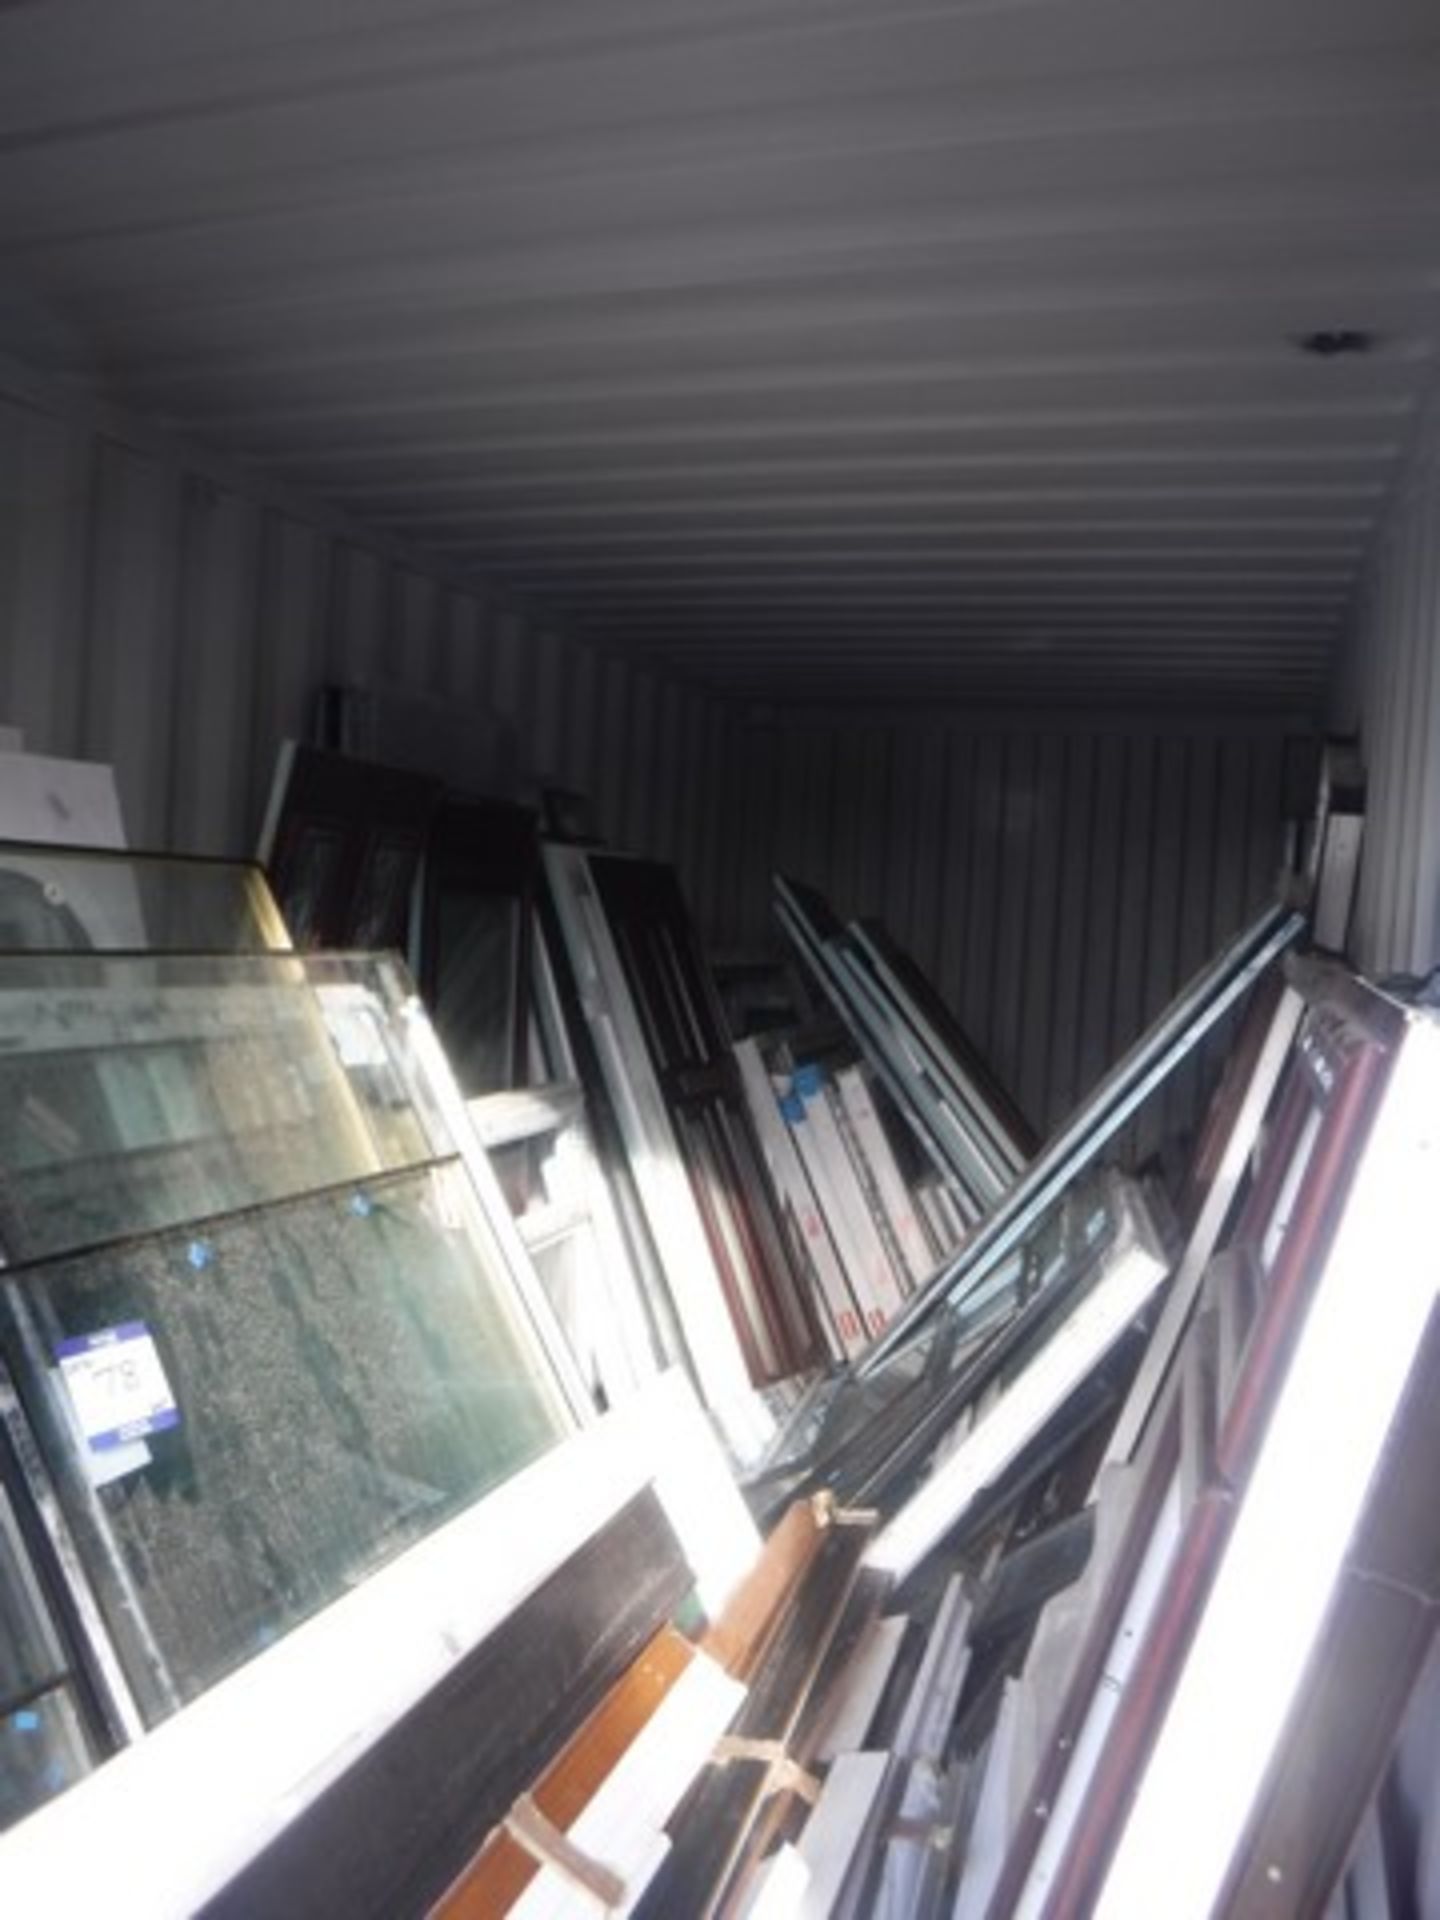 Clearance lot of- PVC windows, door panels, cills and assorted glass, container NOT included in sale